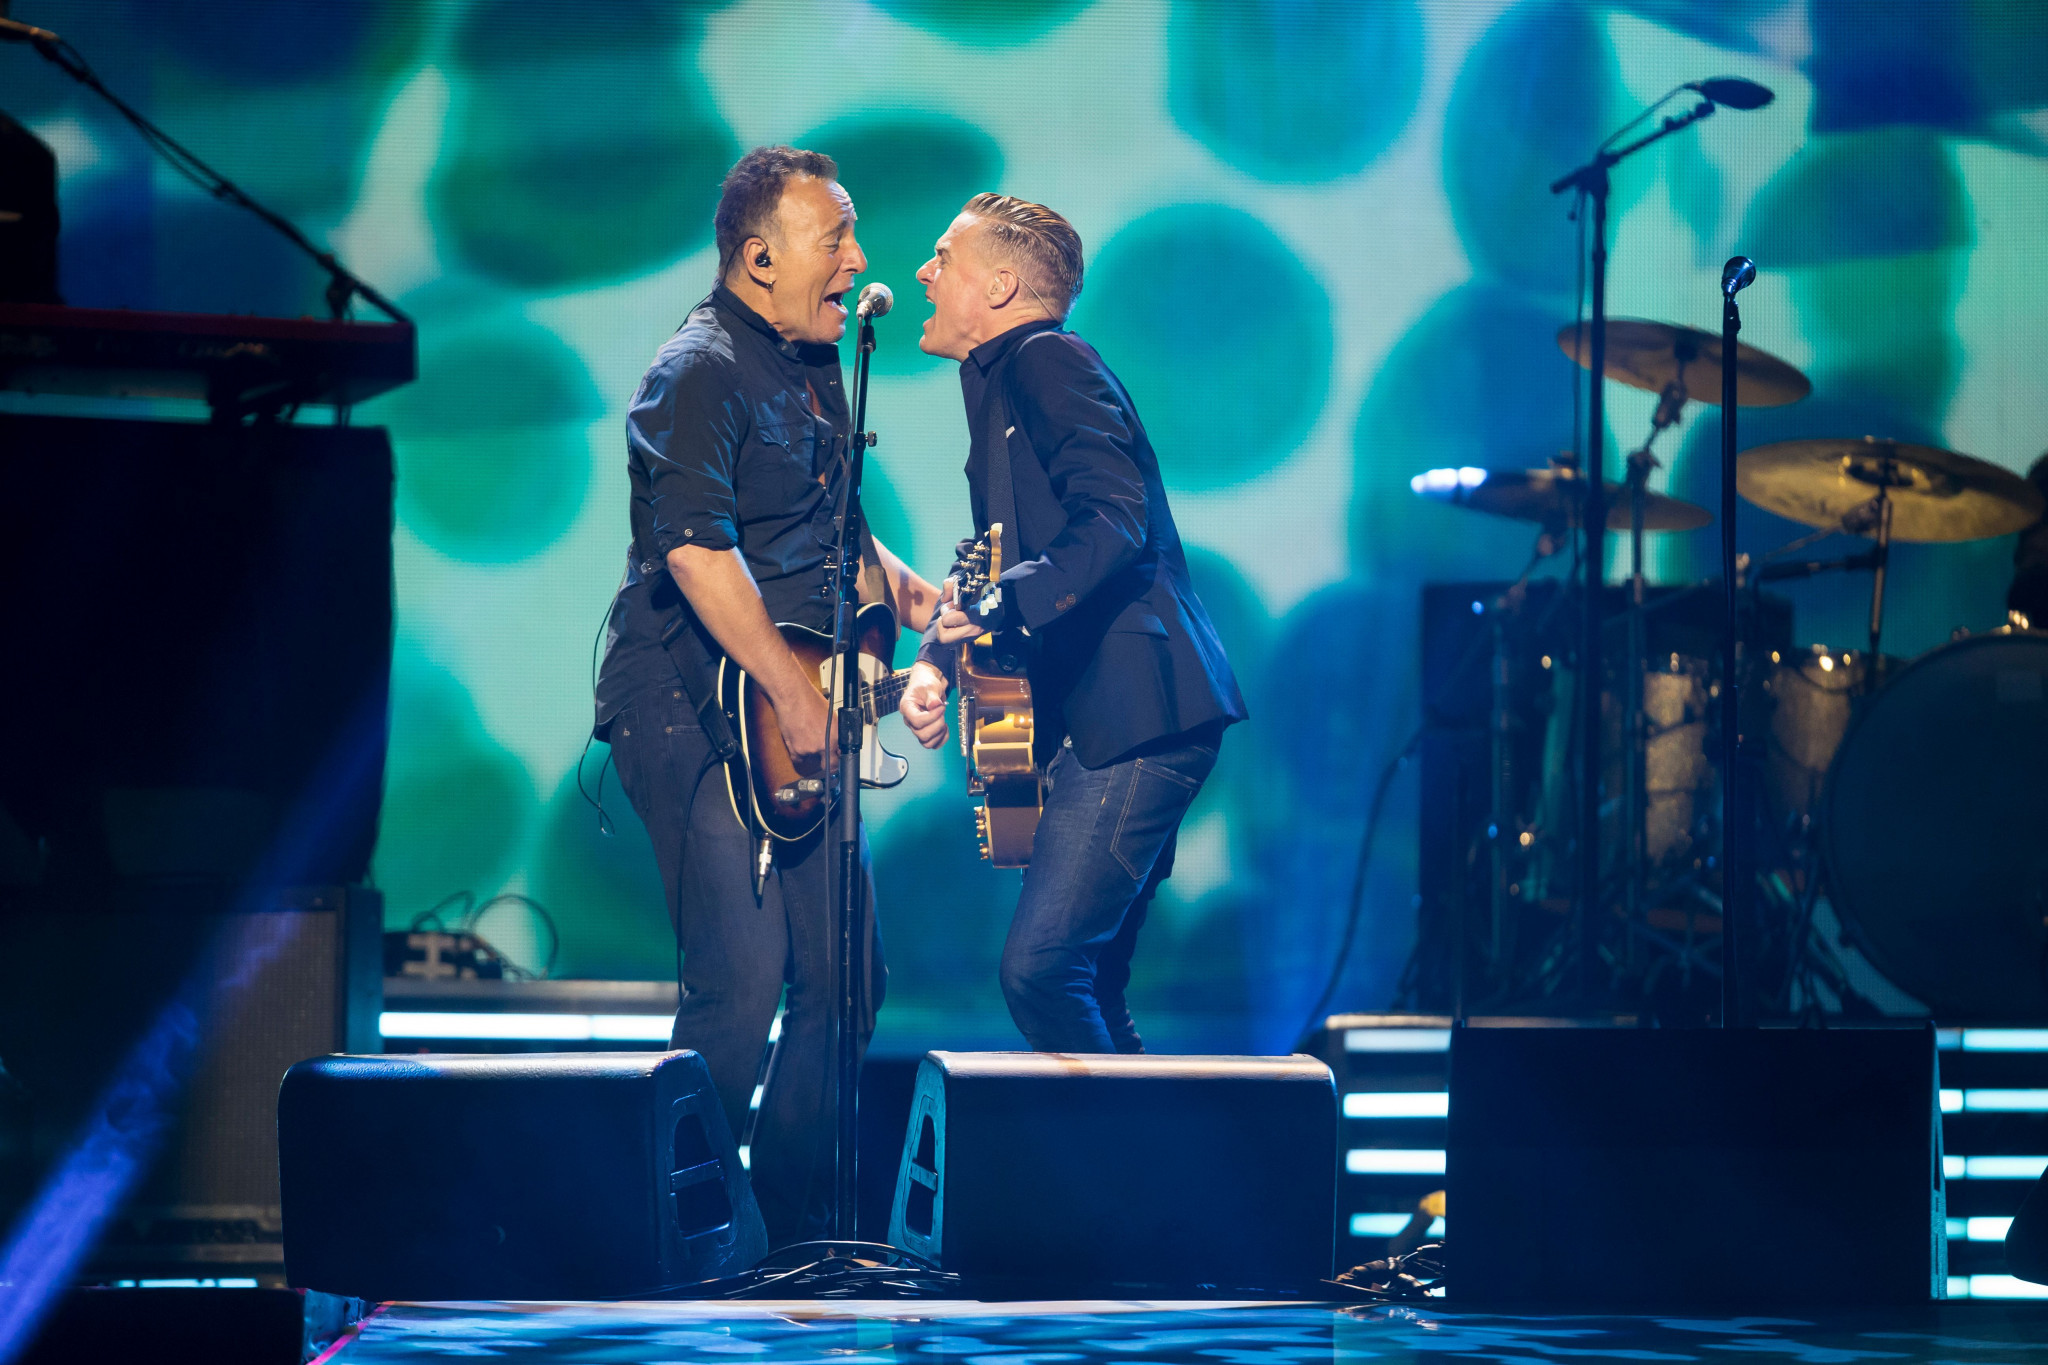 Bruce Springsteen and Bryan Adams were among the performers at the Closing Ceremony ©Getty Images